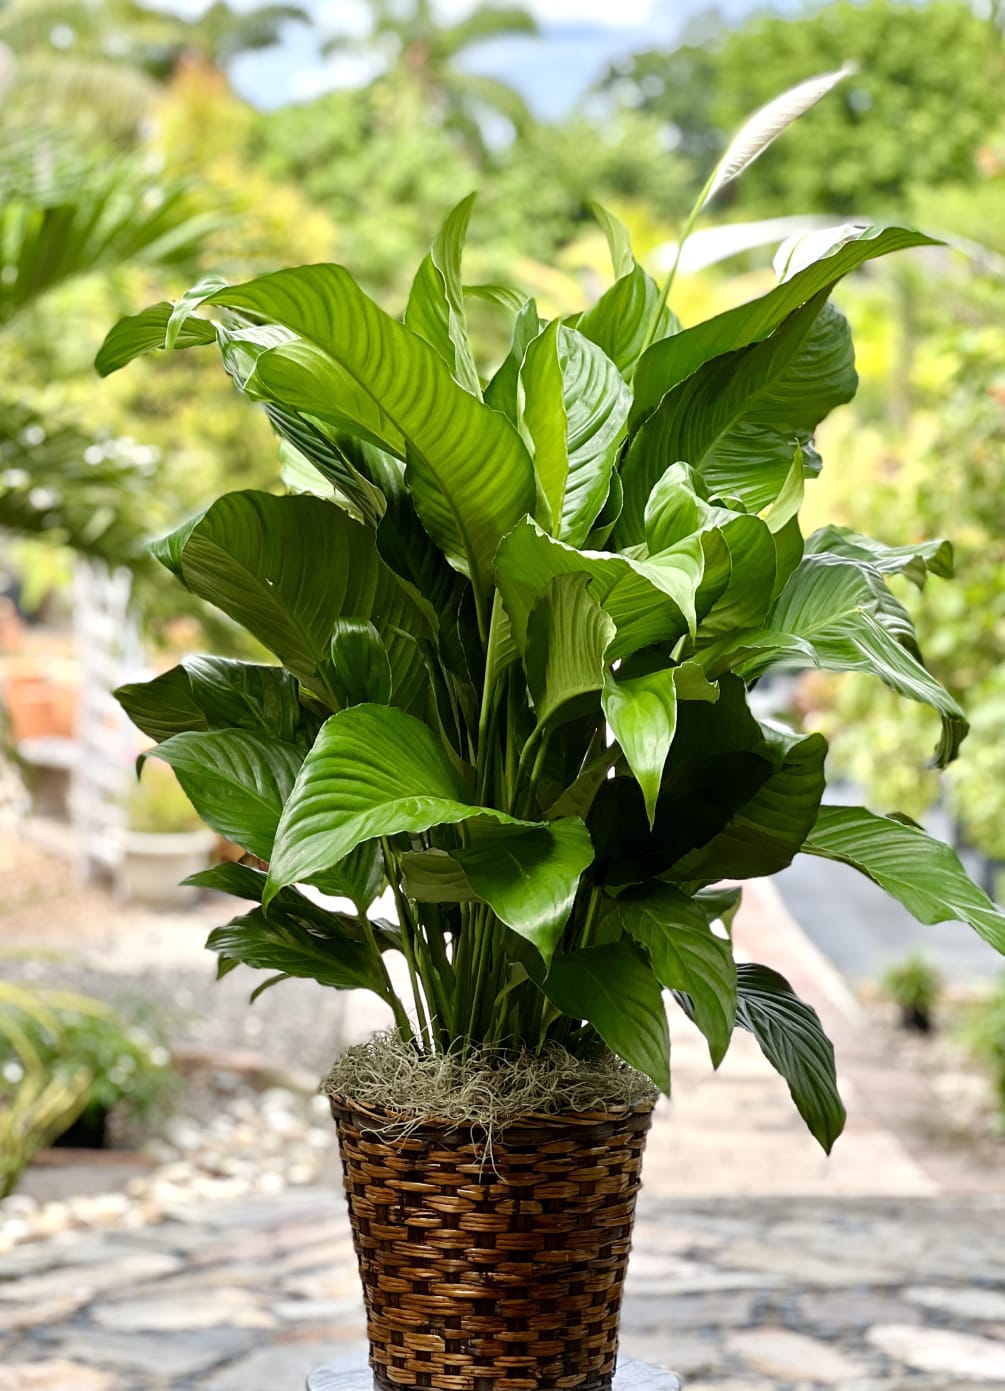 The Peace Lily (Spathiphyllum) is a beautiful plant known for its broad